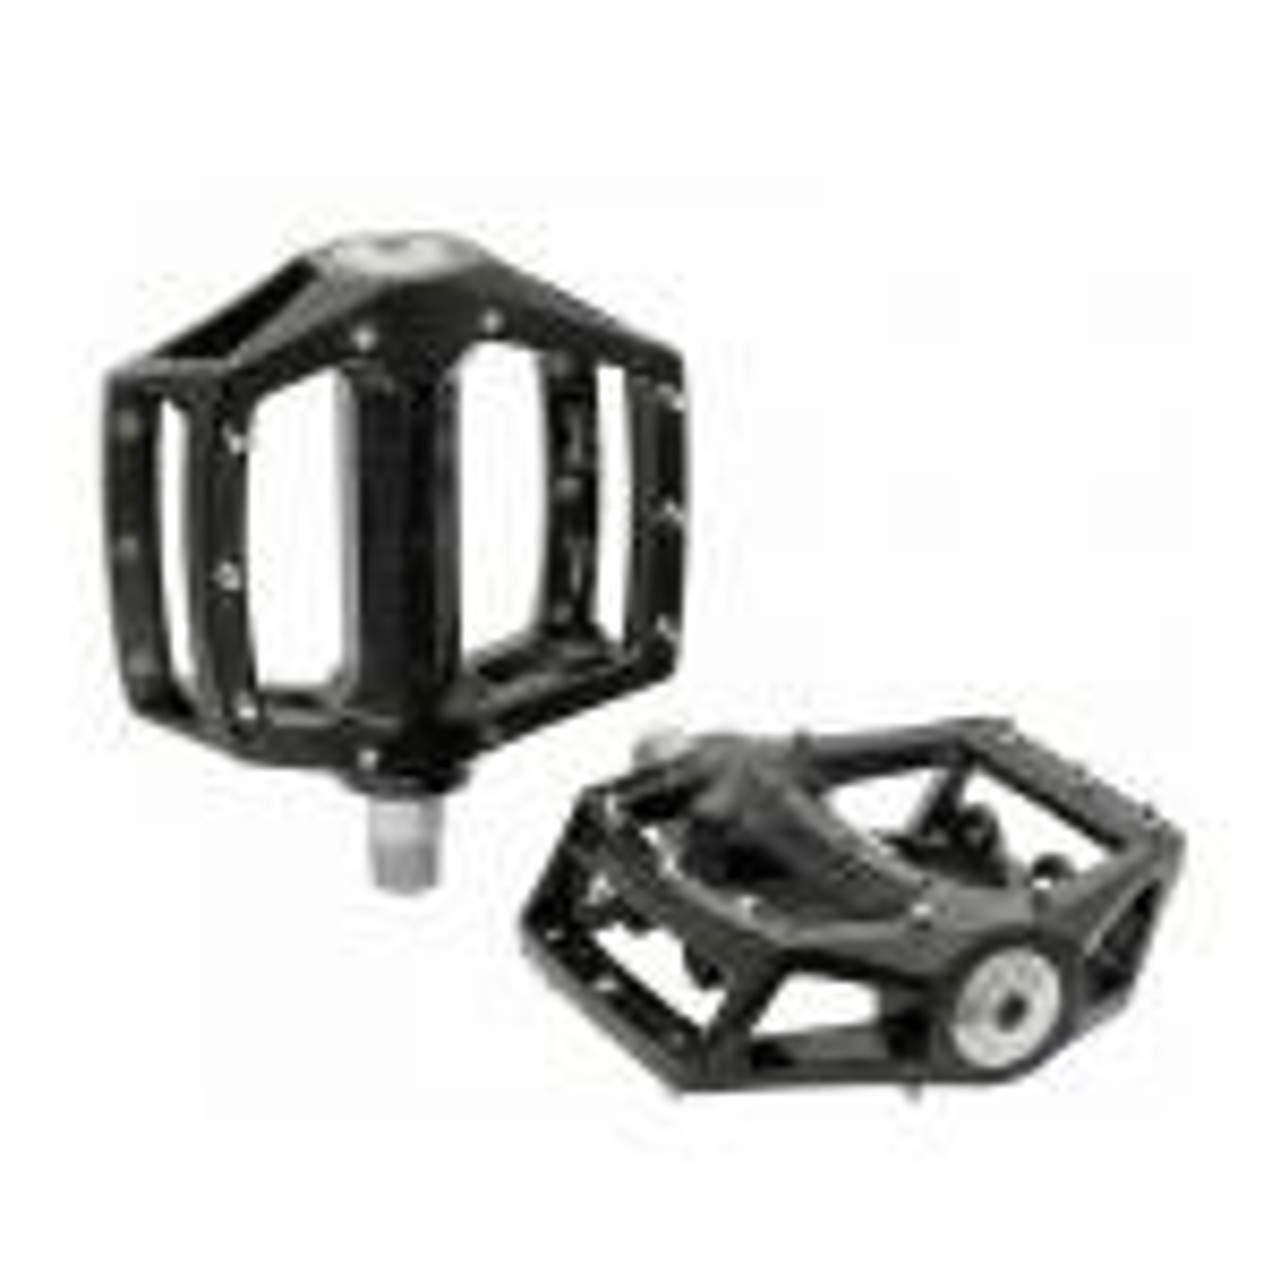 Wellgo LU987B Double Sided 9/16" Pedals In Black